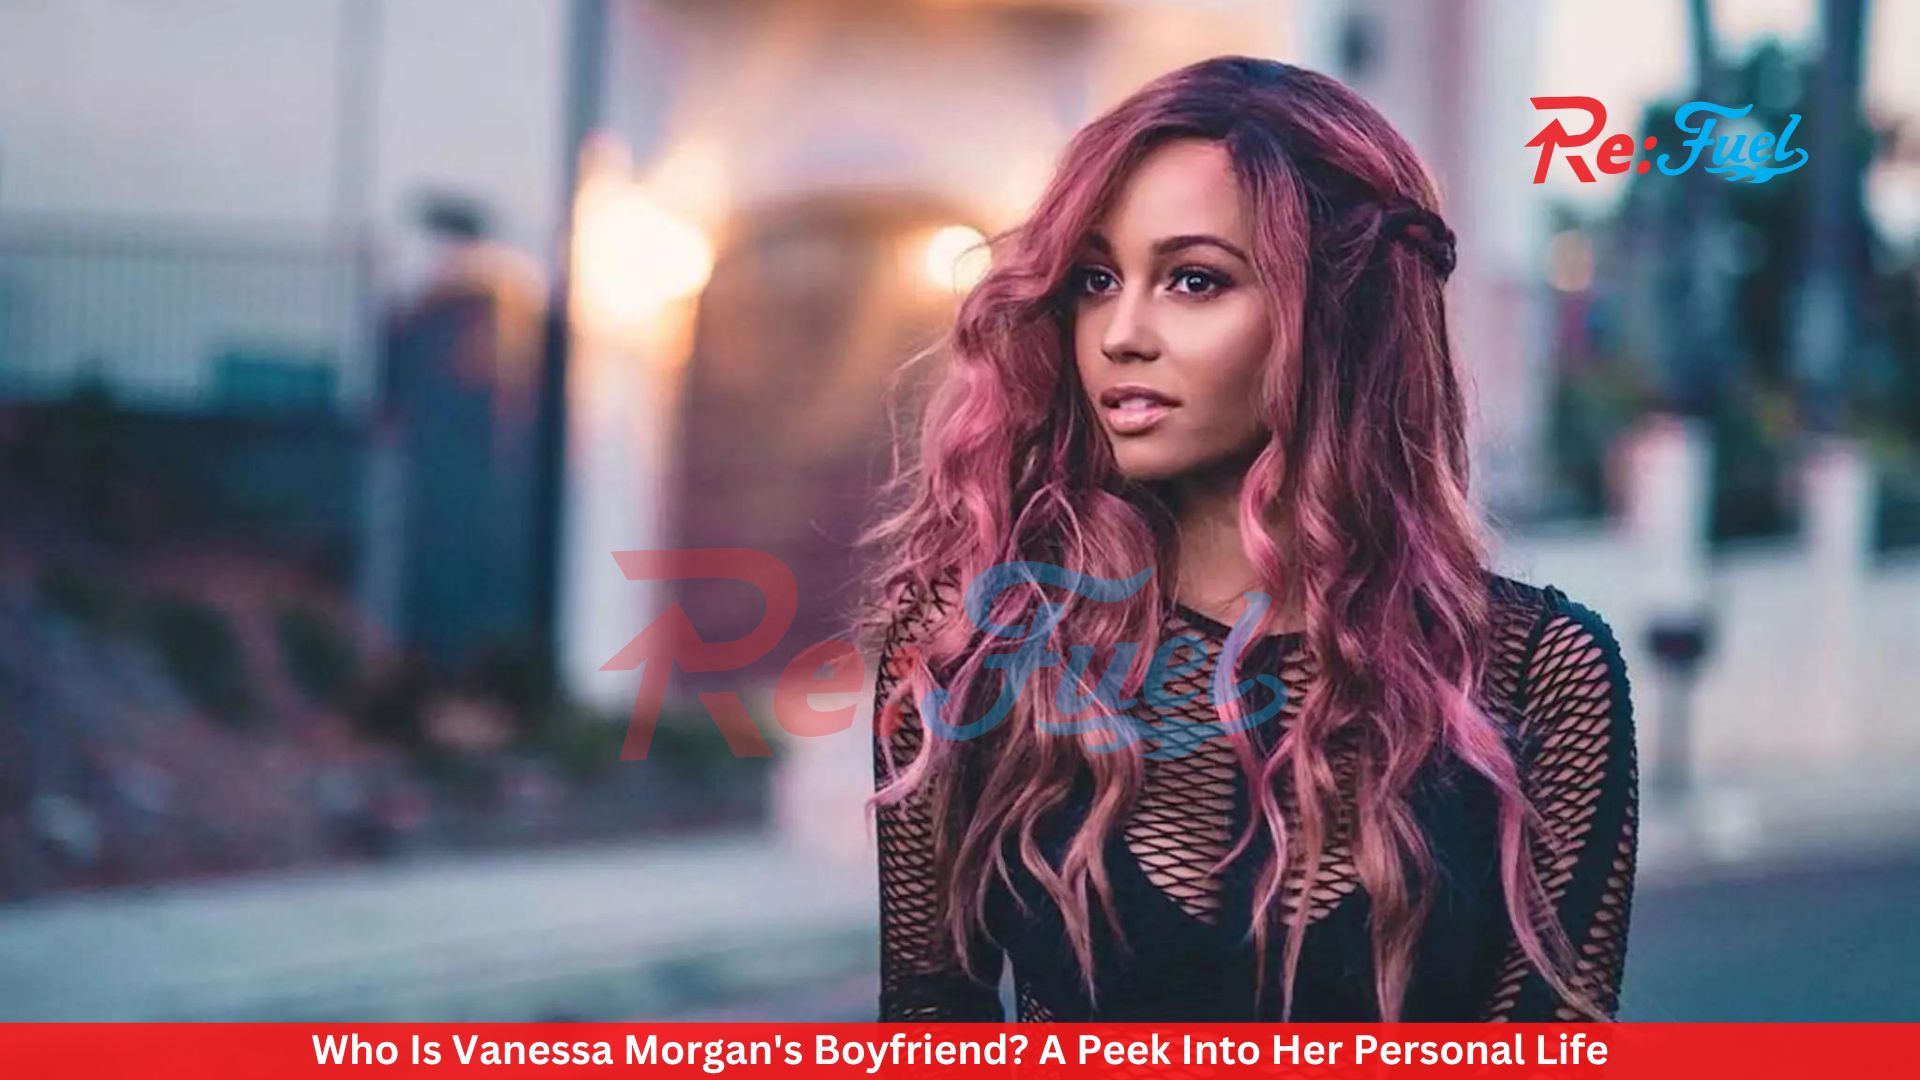 Currently, Vanessa Morgan is prioritizing her time and focusing on the joys of motherhood. She is fully dedicated to nurturing and raising her son, devoting her energy to his growth and well-being.